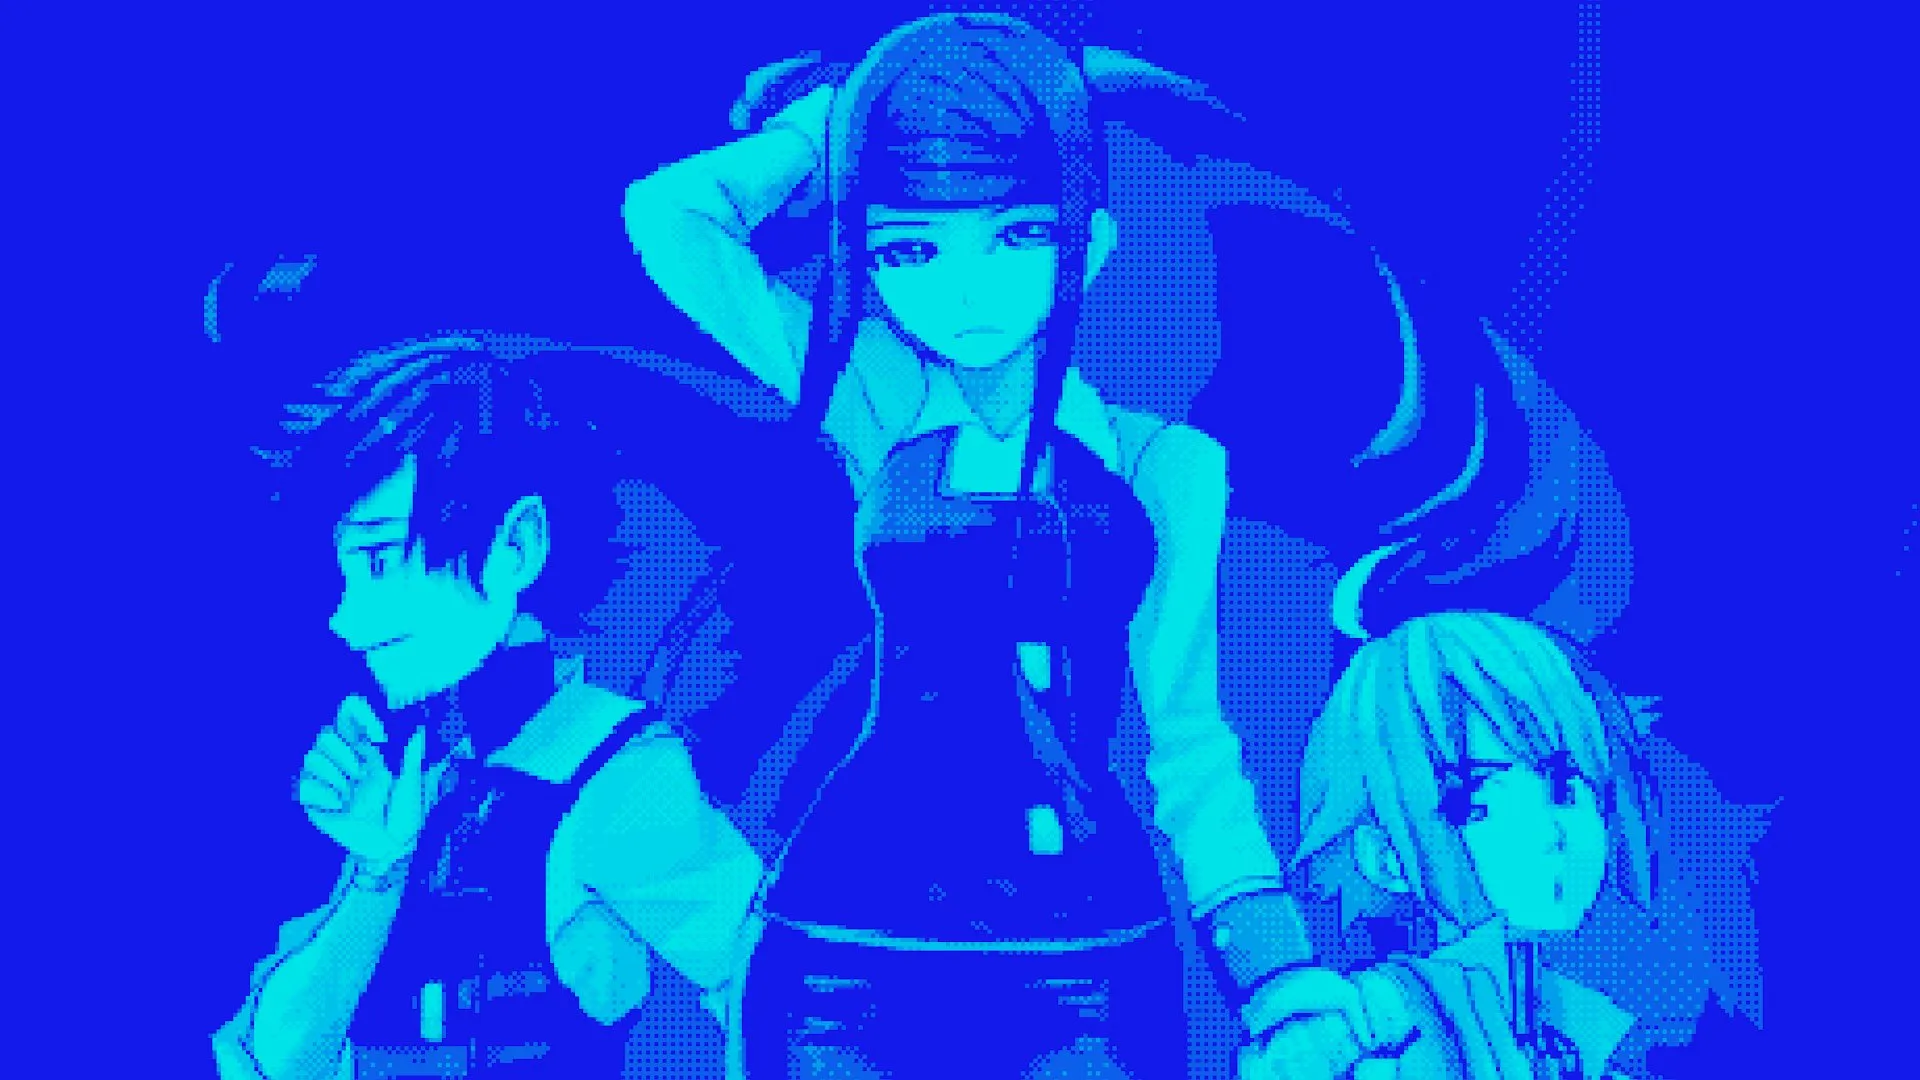 20 VA11 HallA Cyberpunk Bartender Action HD Wallpapers and Backgrounds